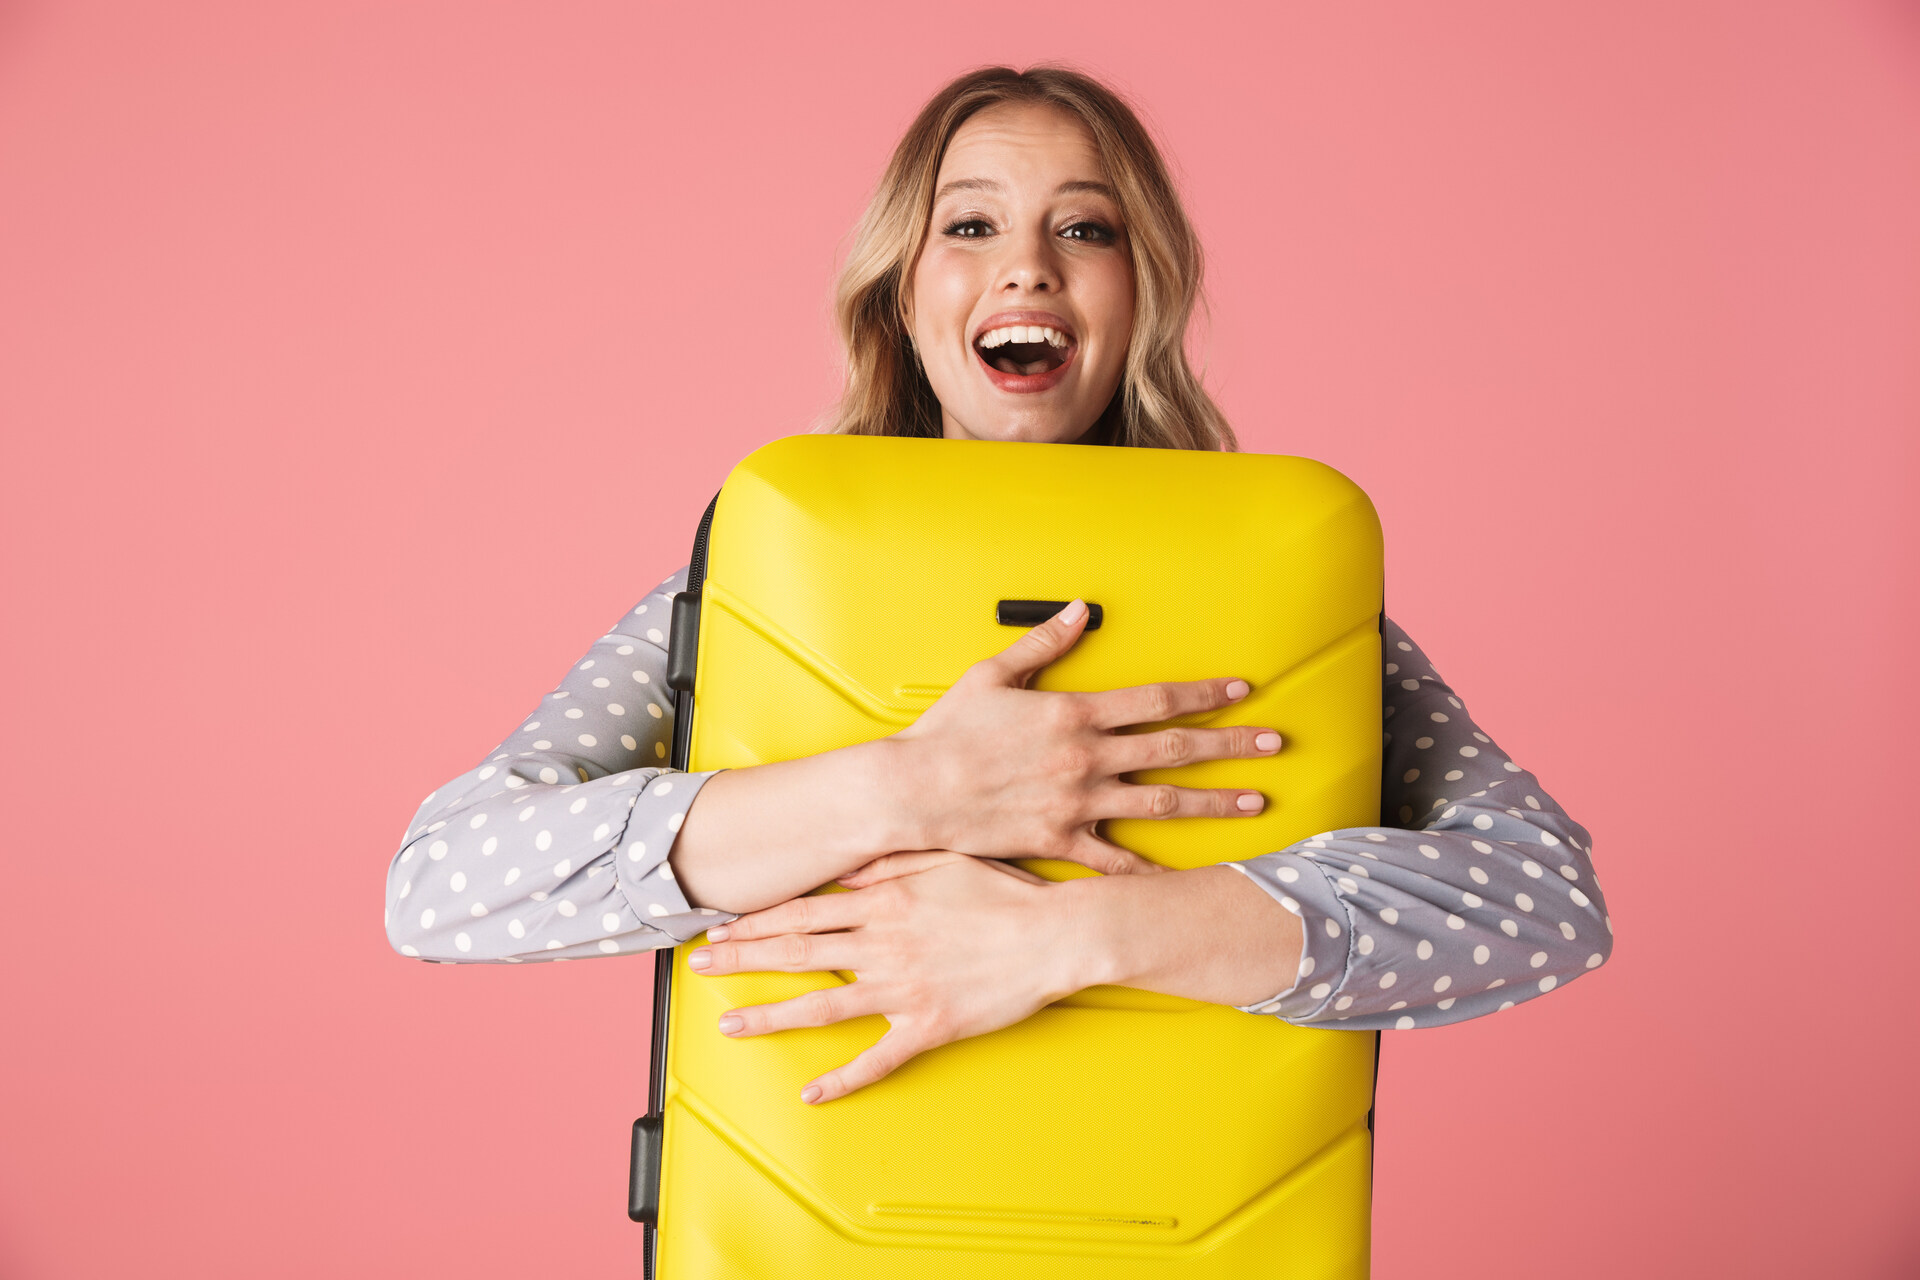 Woman hugging a yellow suitcase